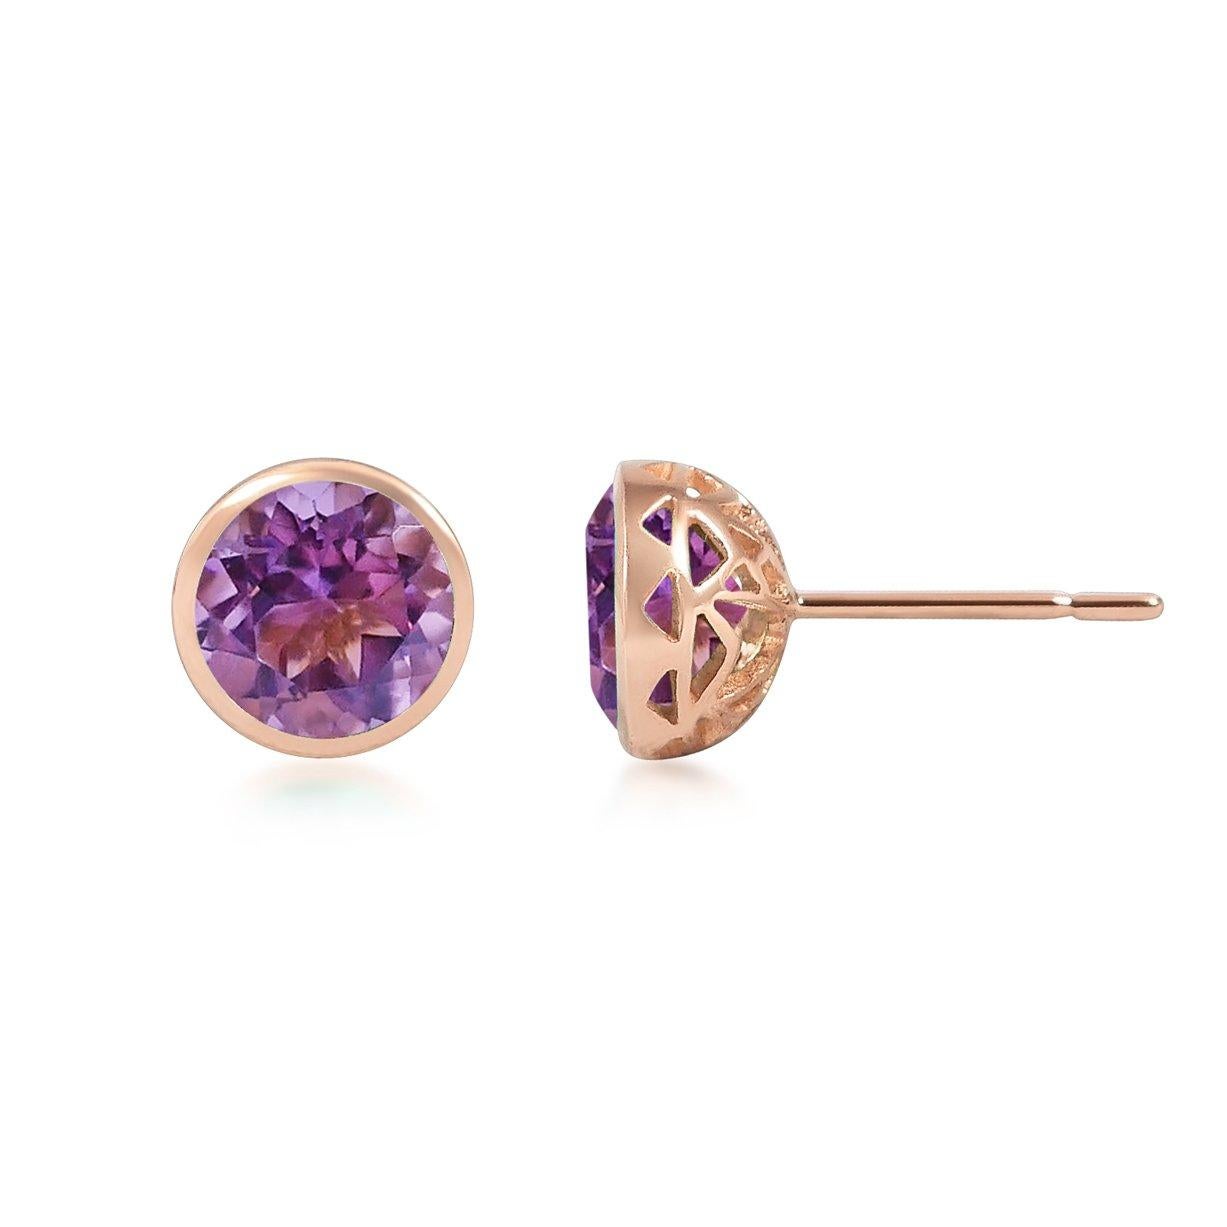 Handcrafted 2.40 Carats Amethyst 18 Karat Rose Gold Stud Earrings. The 8mm natural stones are set in our iconic hand pierced gold lace to let the light through our precious and fine stones our earrings are the perfect everyday wear.

Once considered